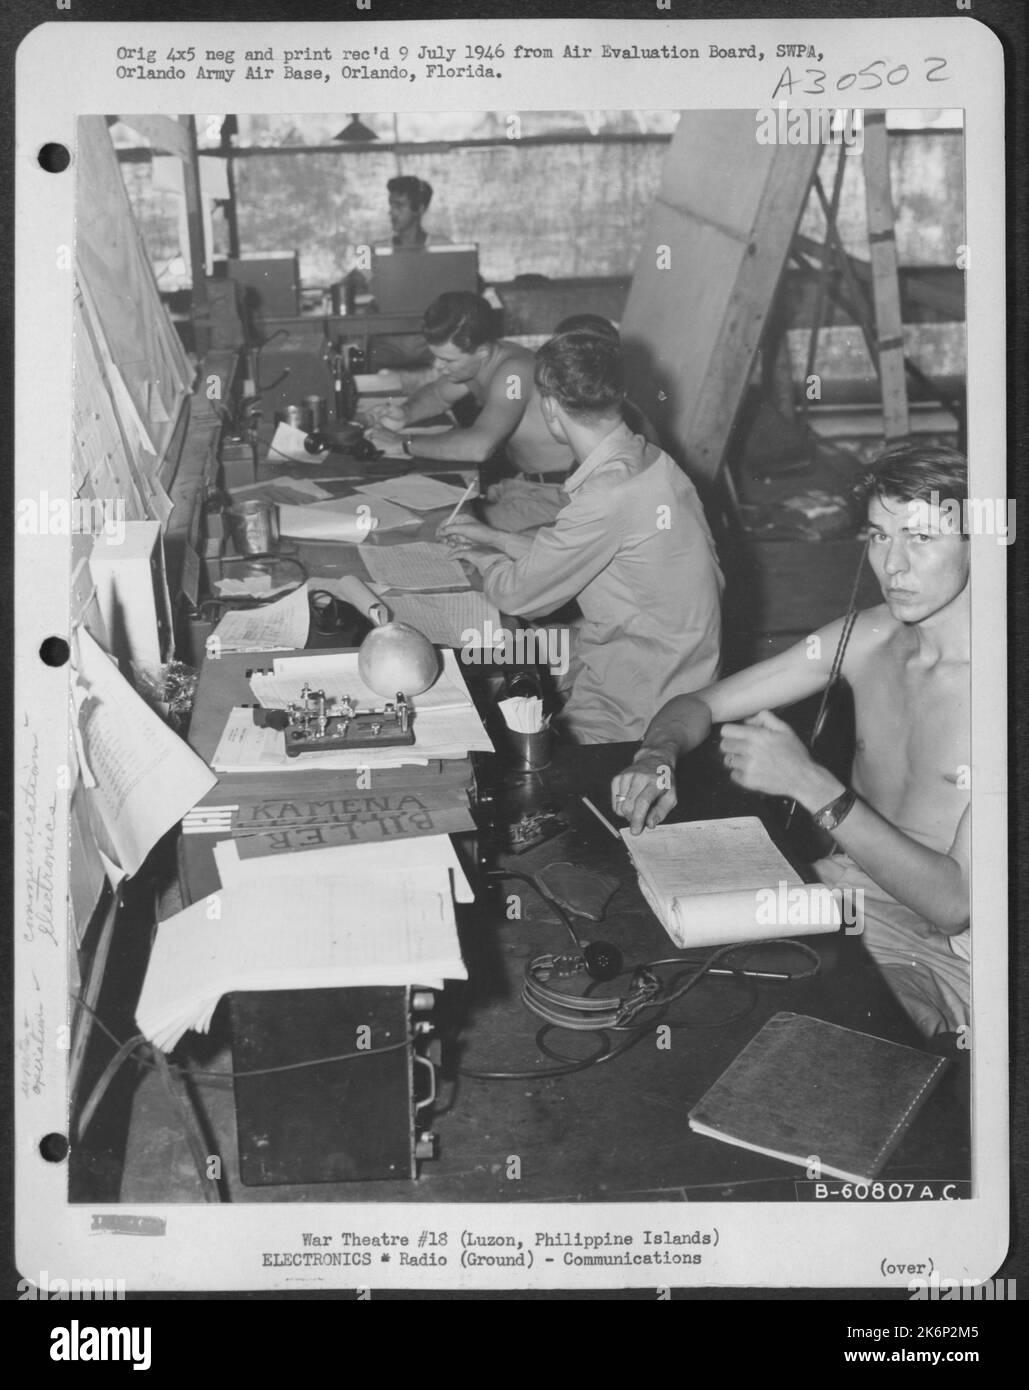 Movements Section of the 45th Fighter Control Center, Luzon, Philippine Islands. This section review all flight plans, having direct contact with local base operations, and receiving all take-off and landings. Thru coninuous wave contact with other Stock Photo